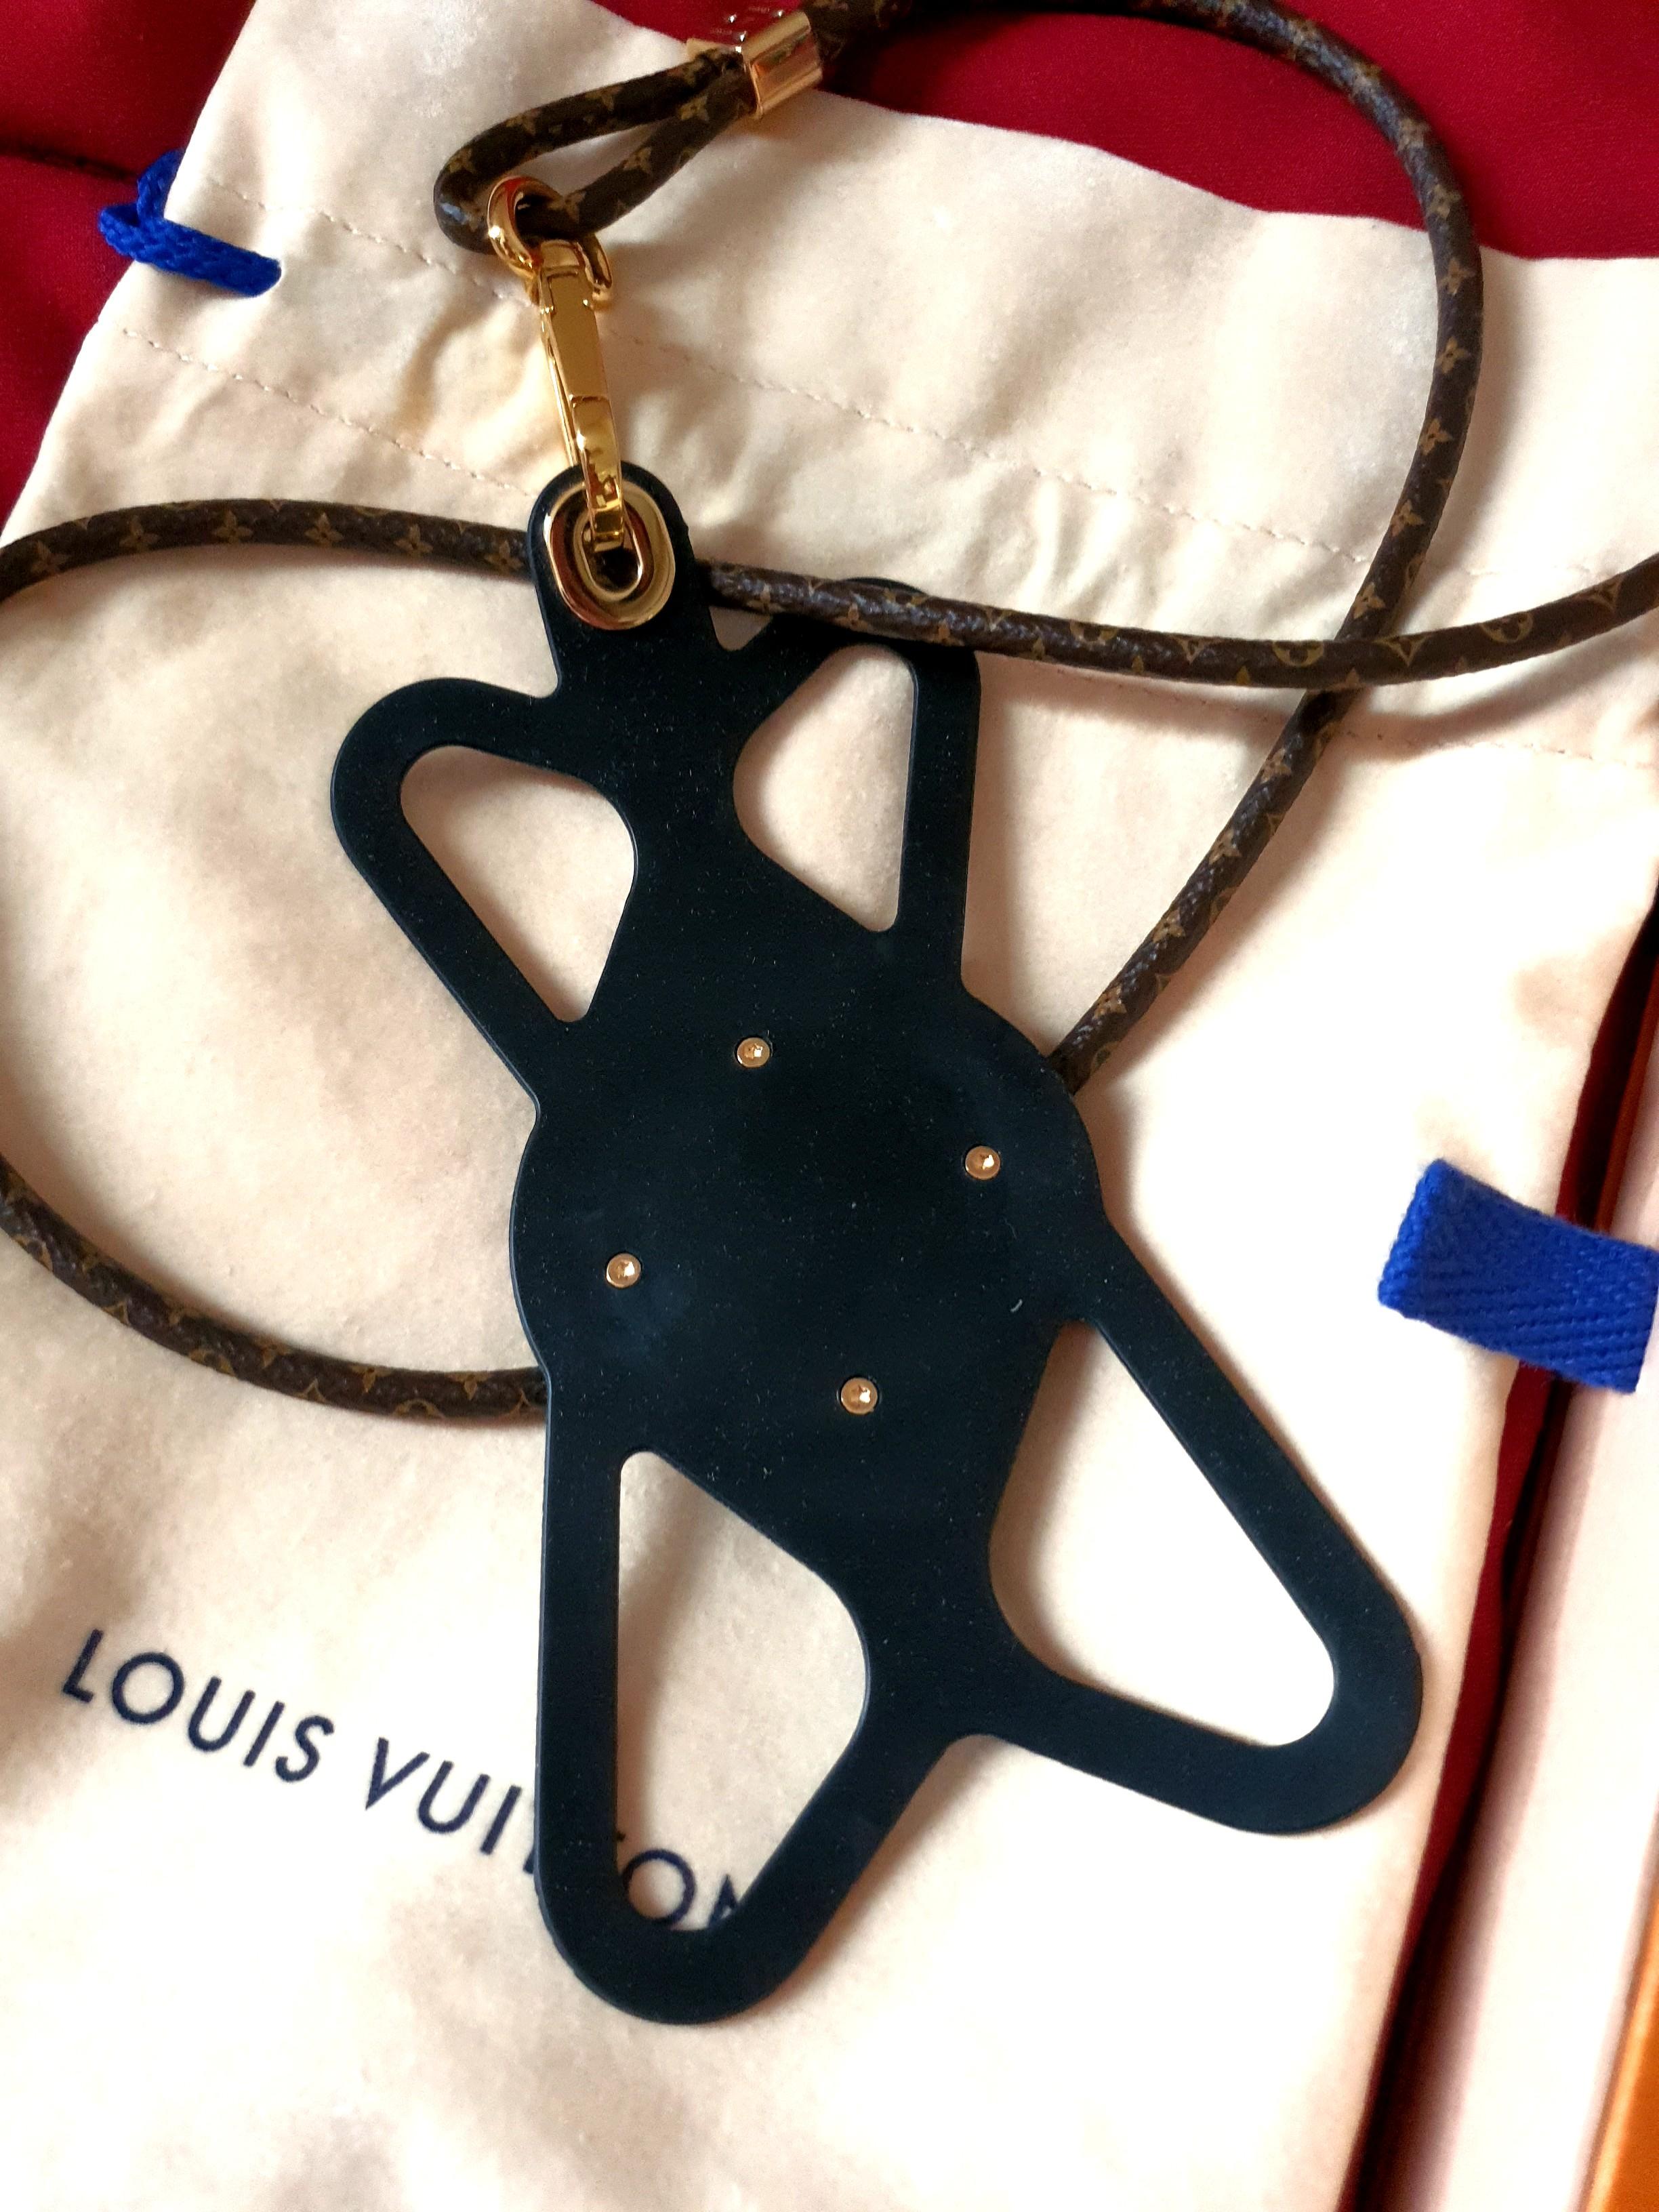 Sold at Auction: LOUIS VUITTON Mobile Phone Holder LOUISE, Coll.: 2019.